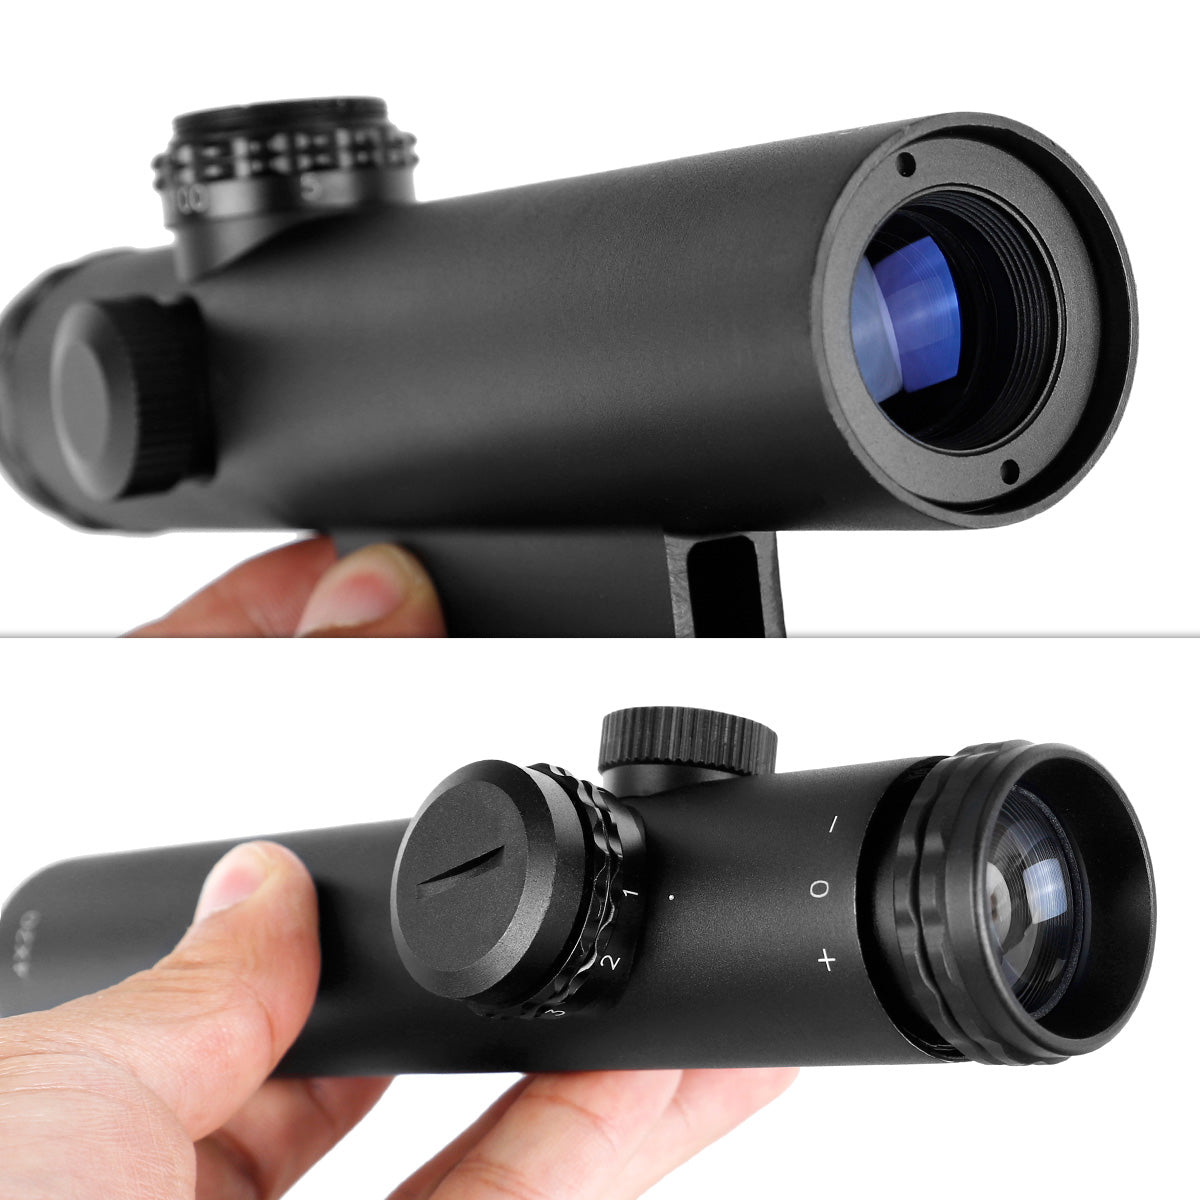 ohhunt® 4x20 Compact Rifle Scope w/ Carry Handle Mount BDC Turret